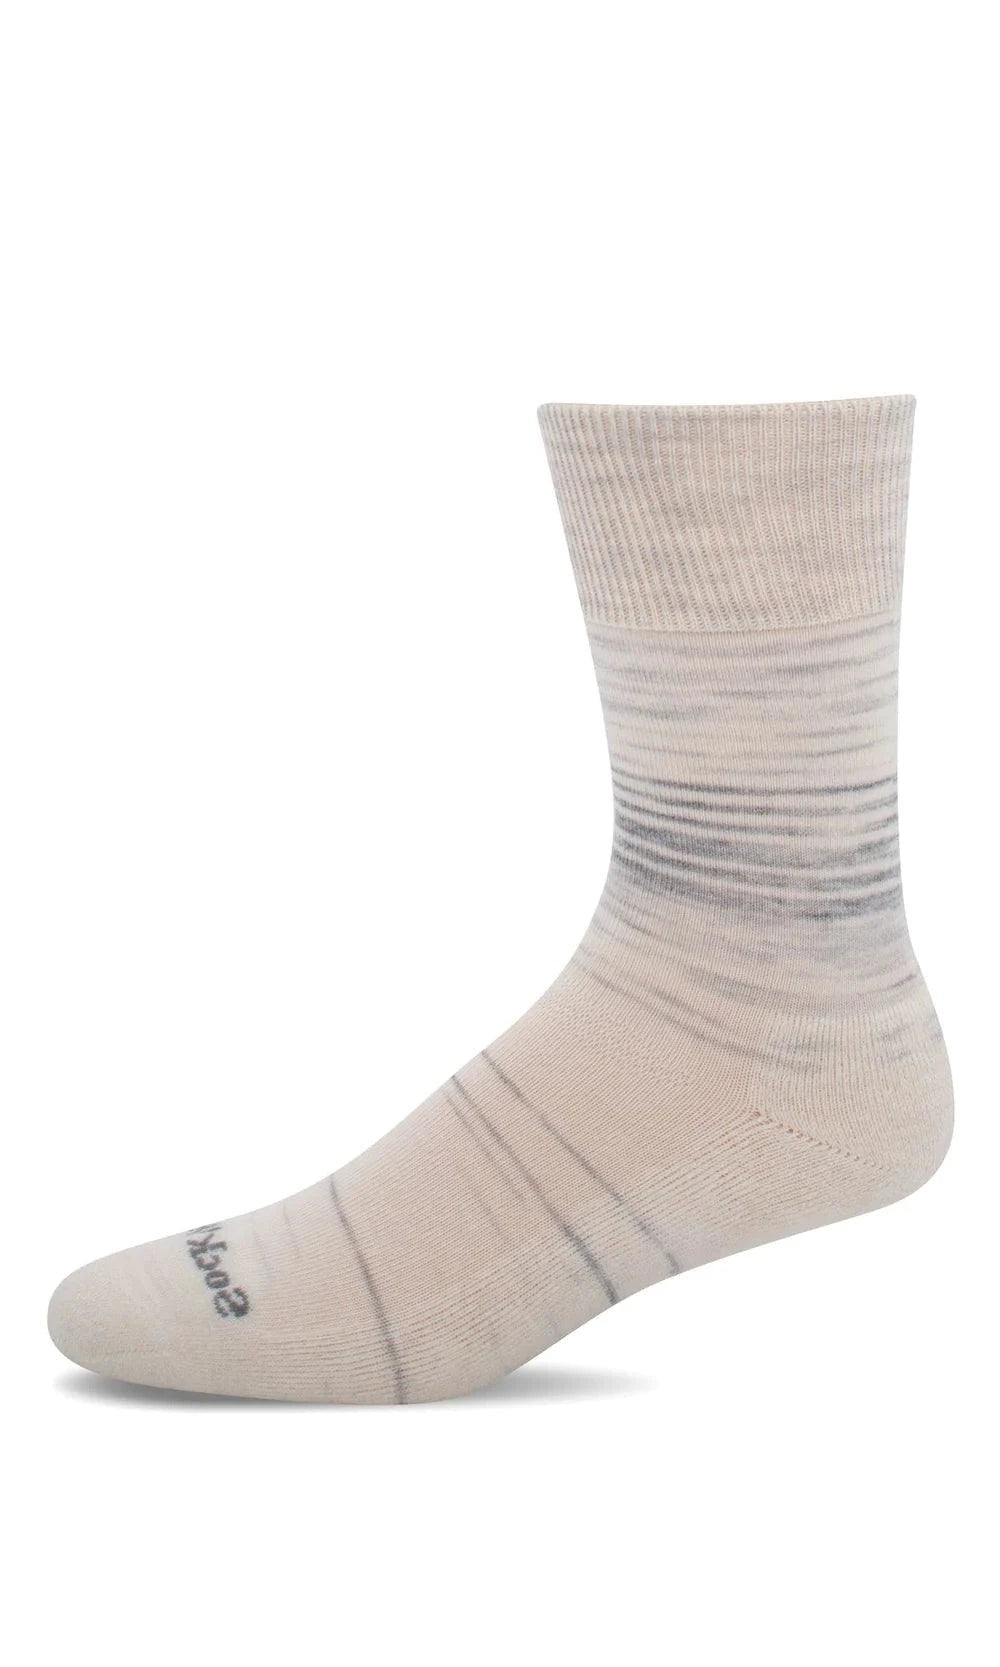 Easy Does It | Relaxed Fit | Ash - Socks - Sockwell